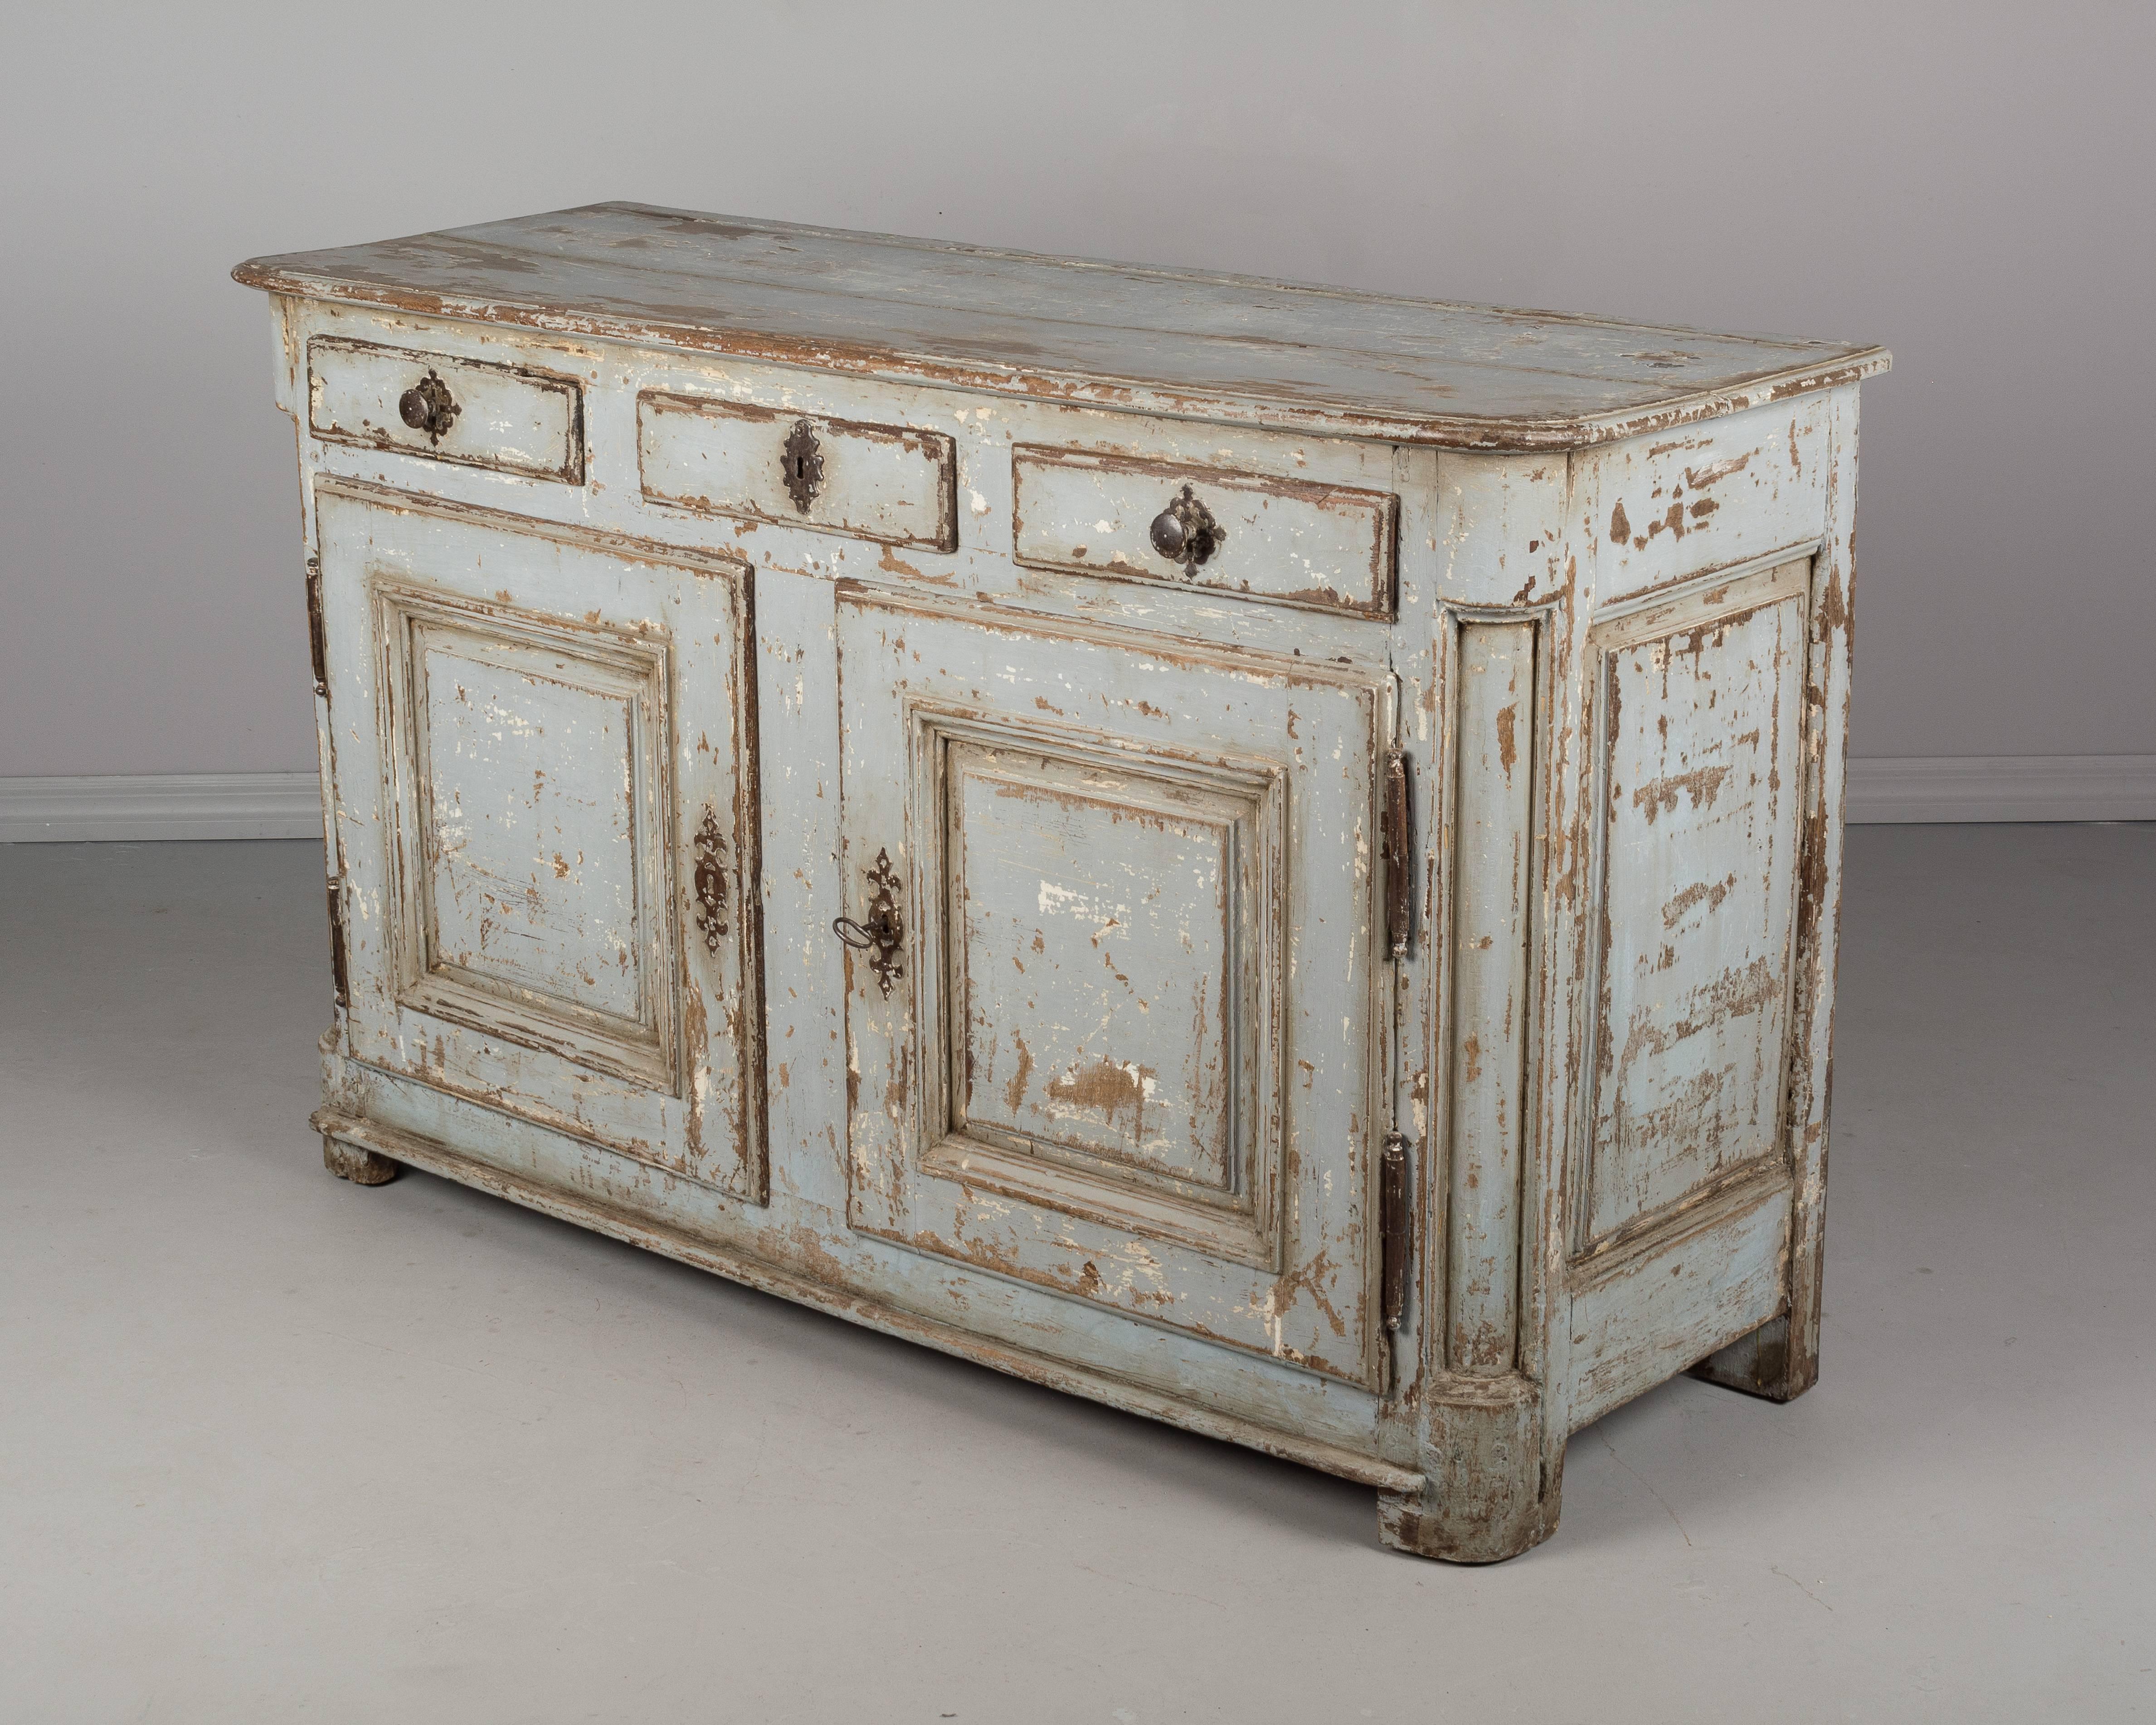 A large 18th century Country French buffet made of solid oak with newer distressed blue grey painted finish. Three dovetailed drawers. Ample storage provided, opening to a single shelf. Original hardware. Working lock and key. Old restoration on